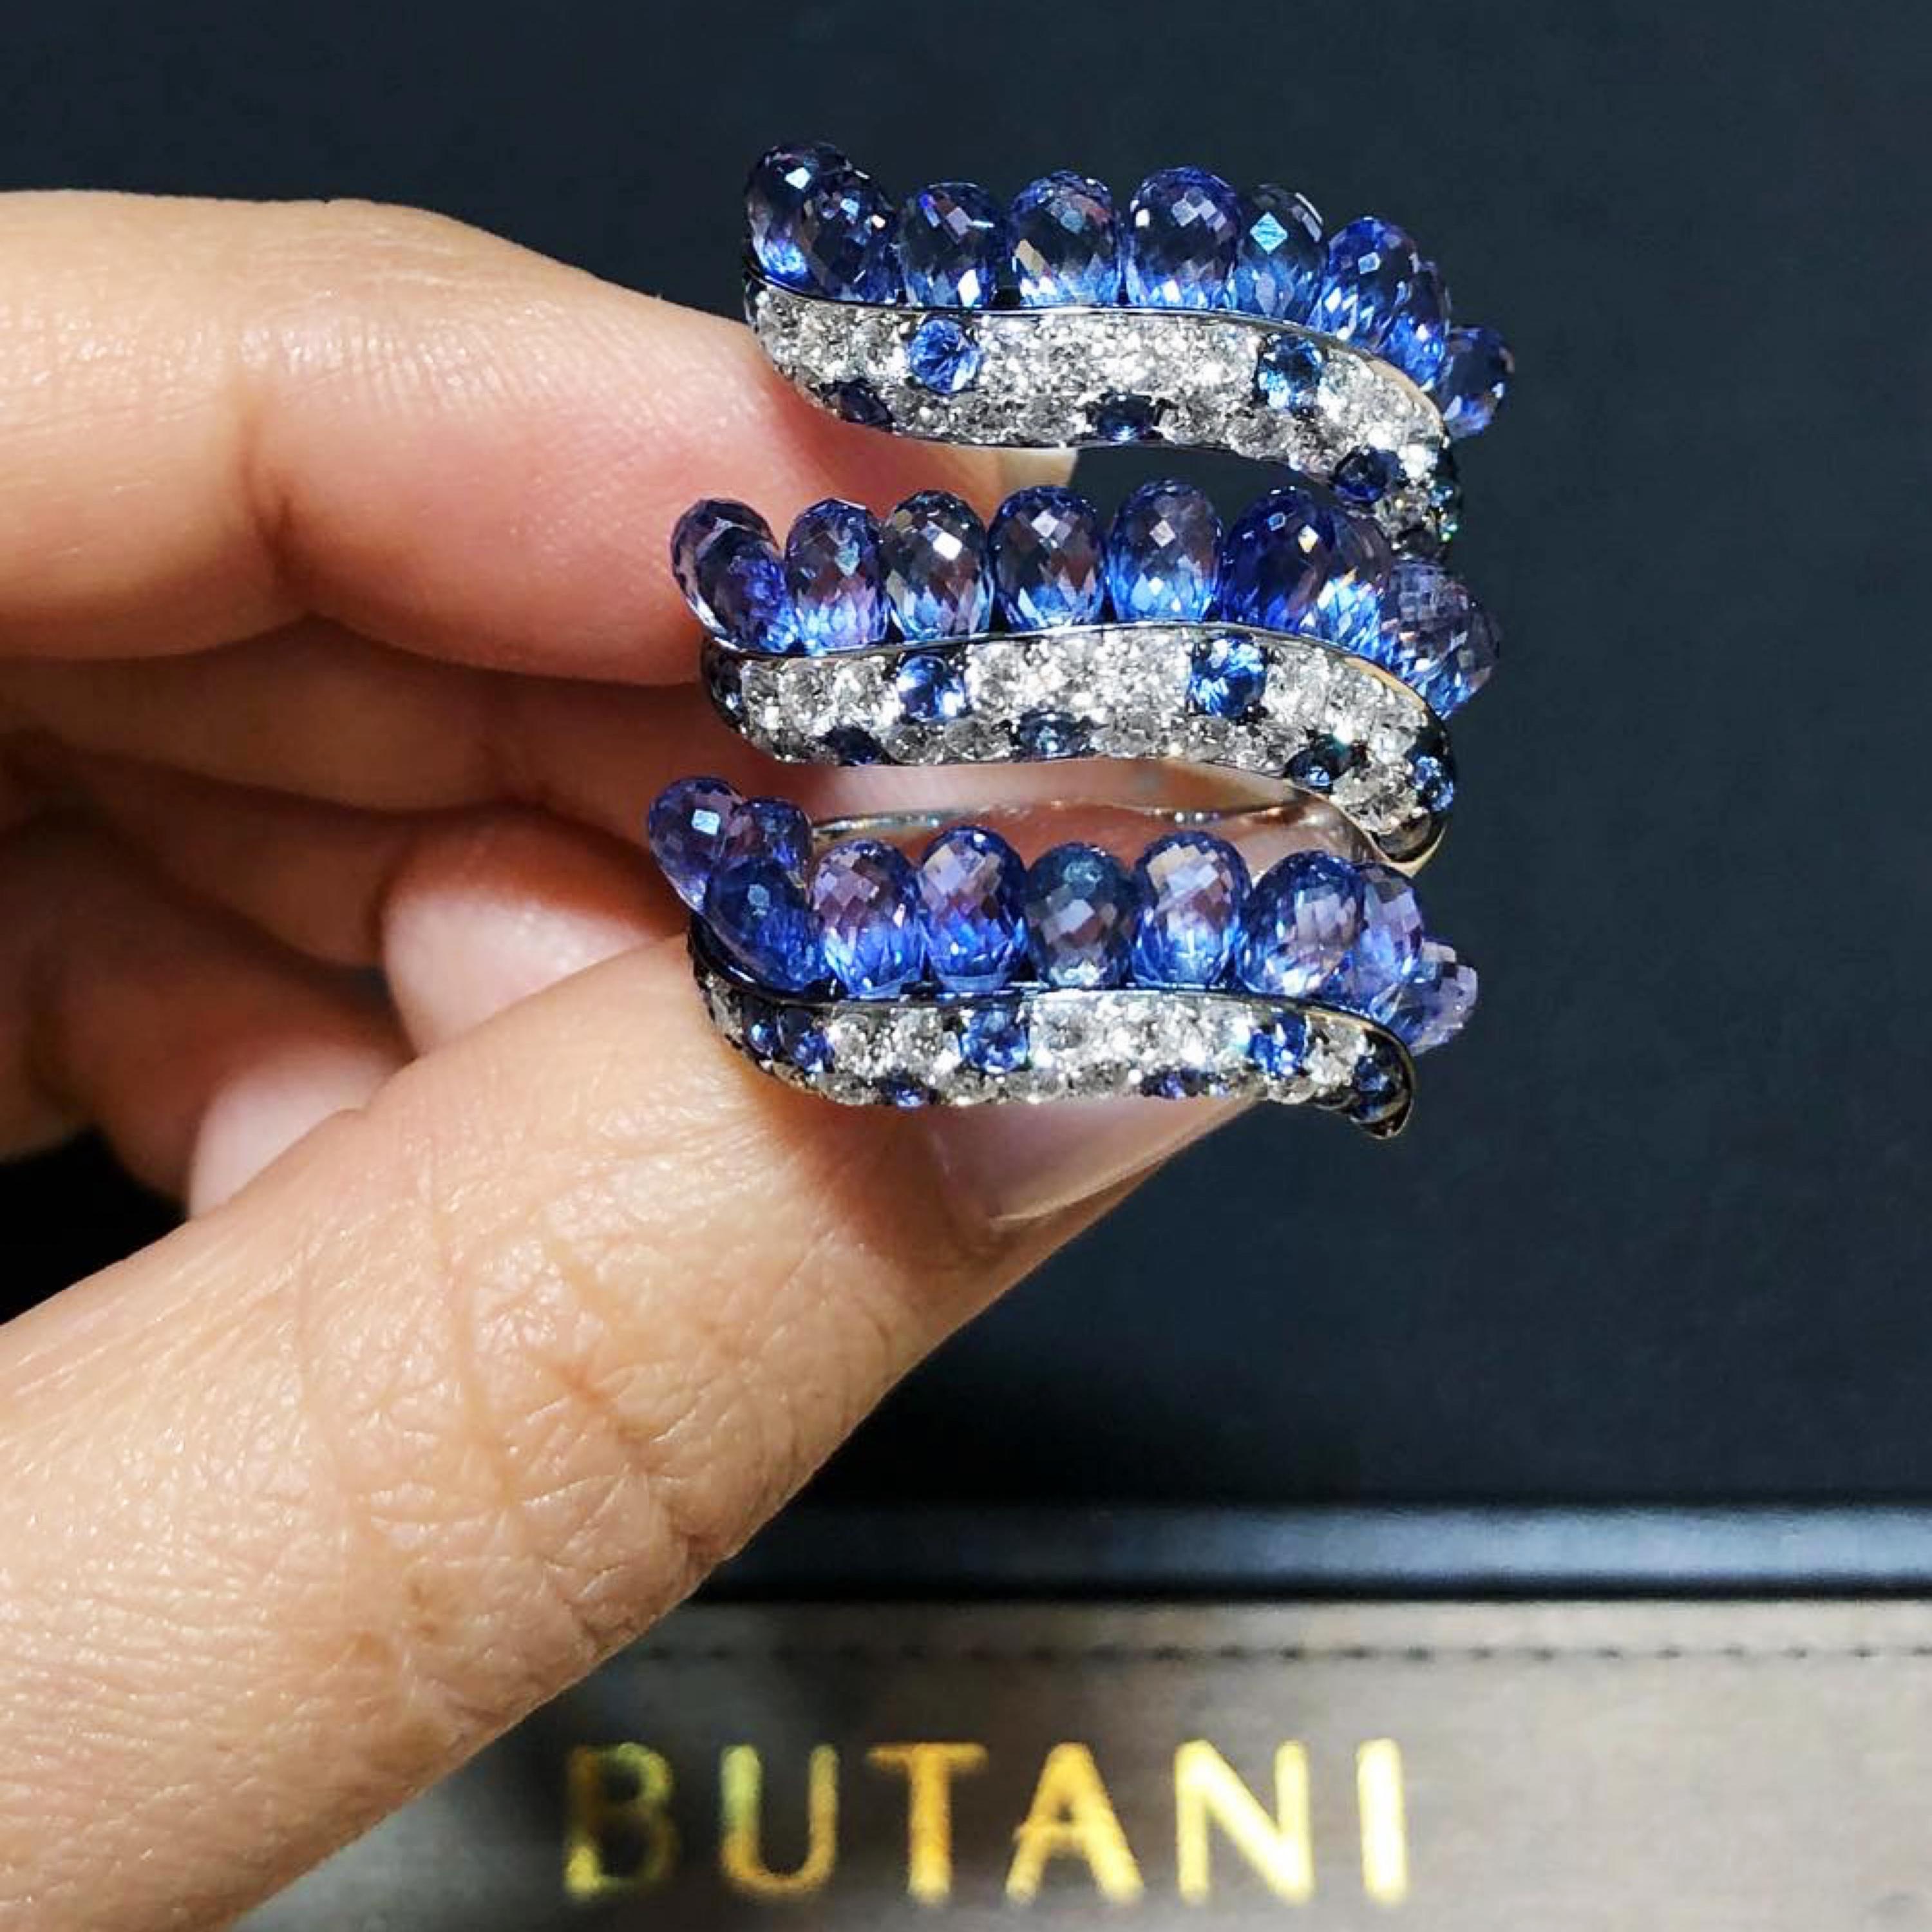 Featuring a wrap silhouette, Butani's 18-karat white gold ring is encrusted with 16.7 carats of blue sapphire briolettes.  These eye-catching gemstones are delicately set as though they are floating drops in a sea of white diamonds (totaling 1.69